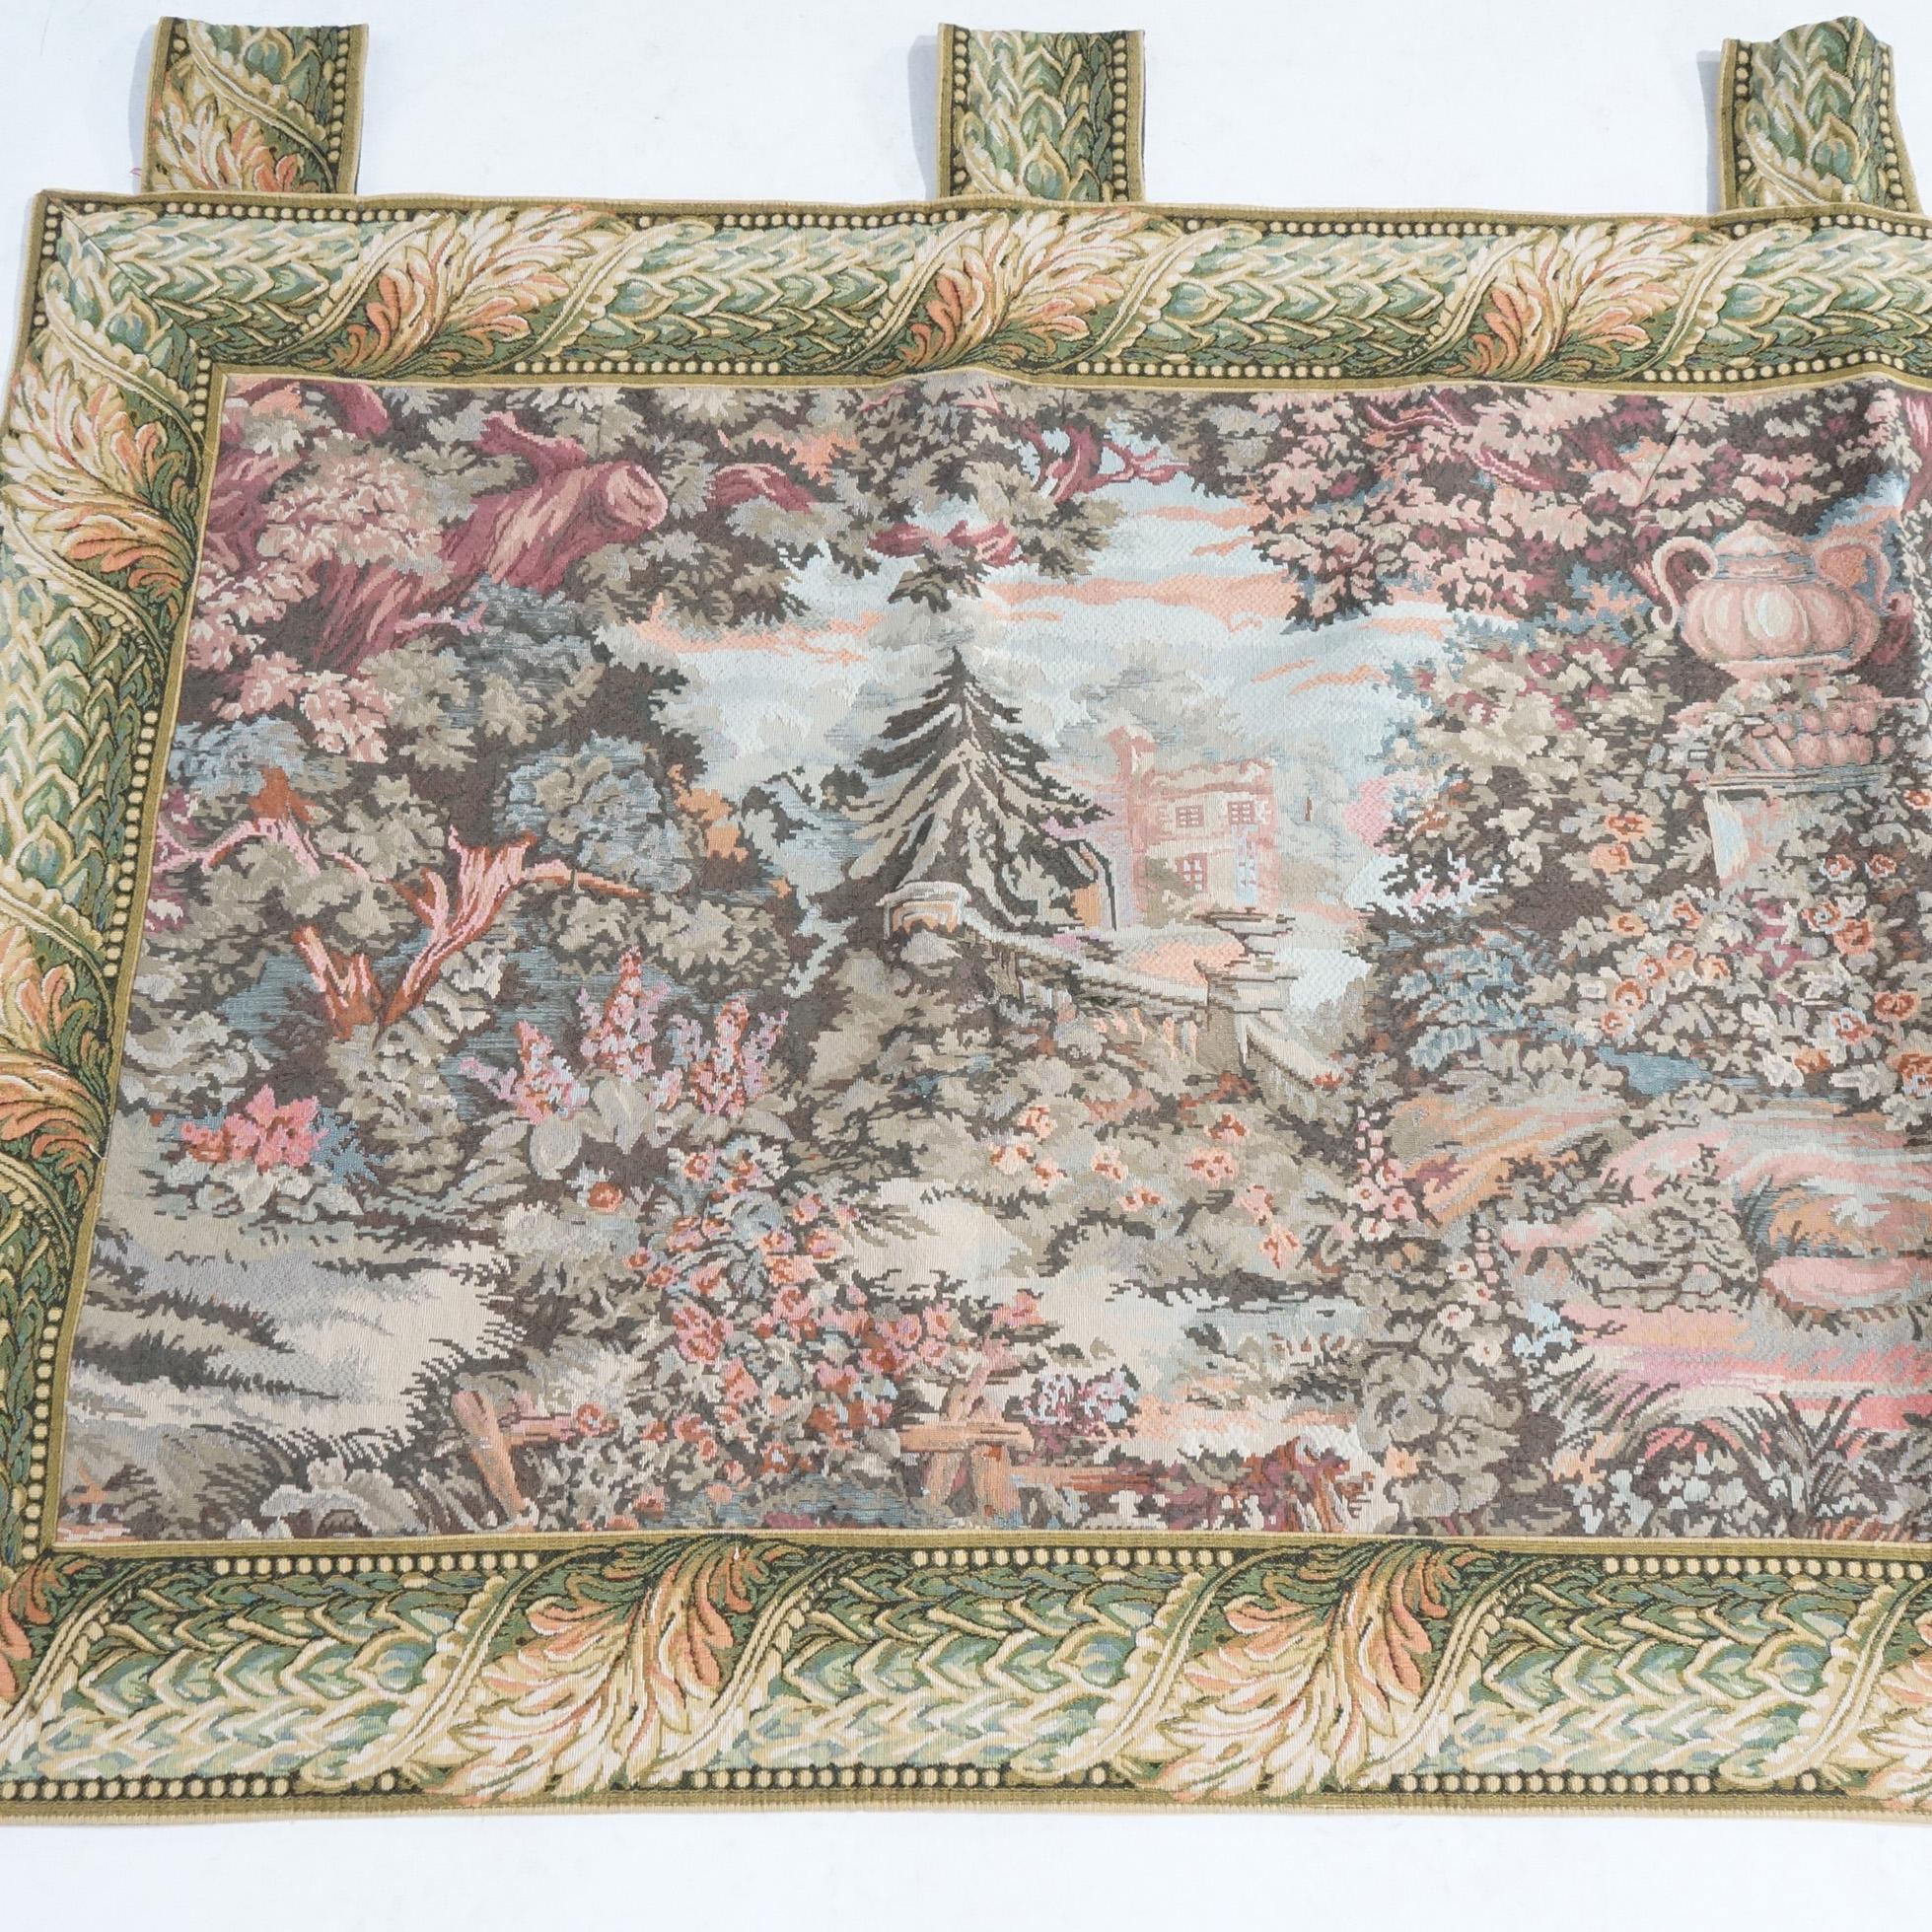 A Contemporary Greco-Roman scenic landscape wall tapestry 20th century

Measures- 40.25''H x 81.5''W x .5''D.